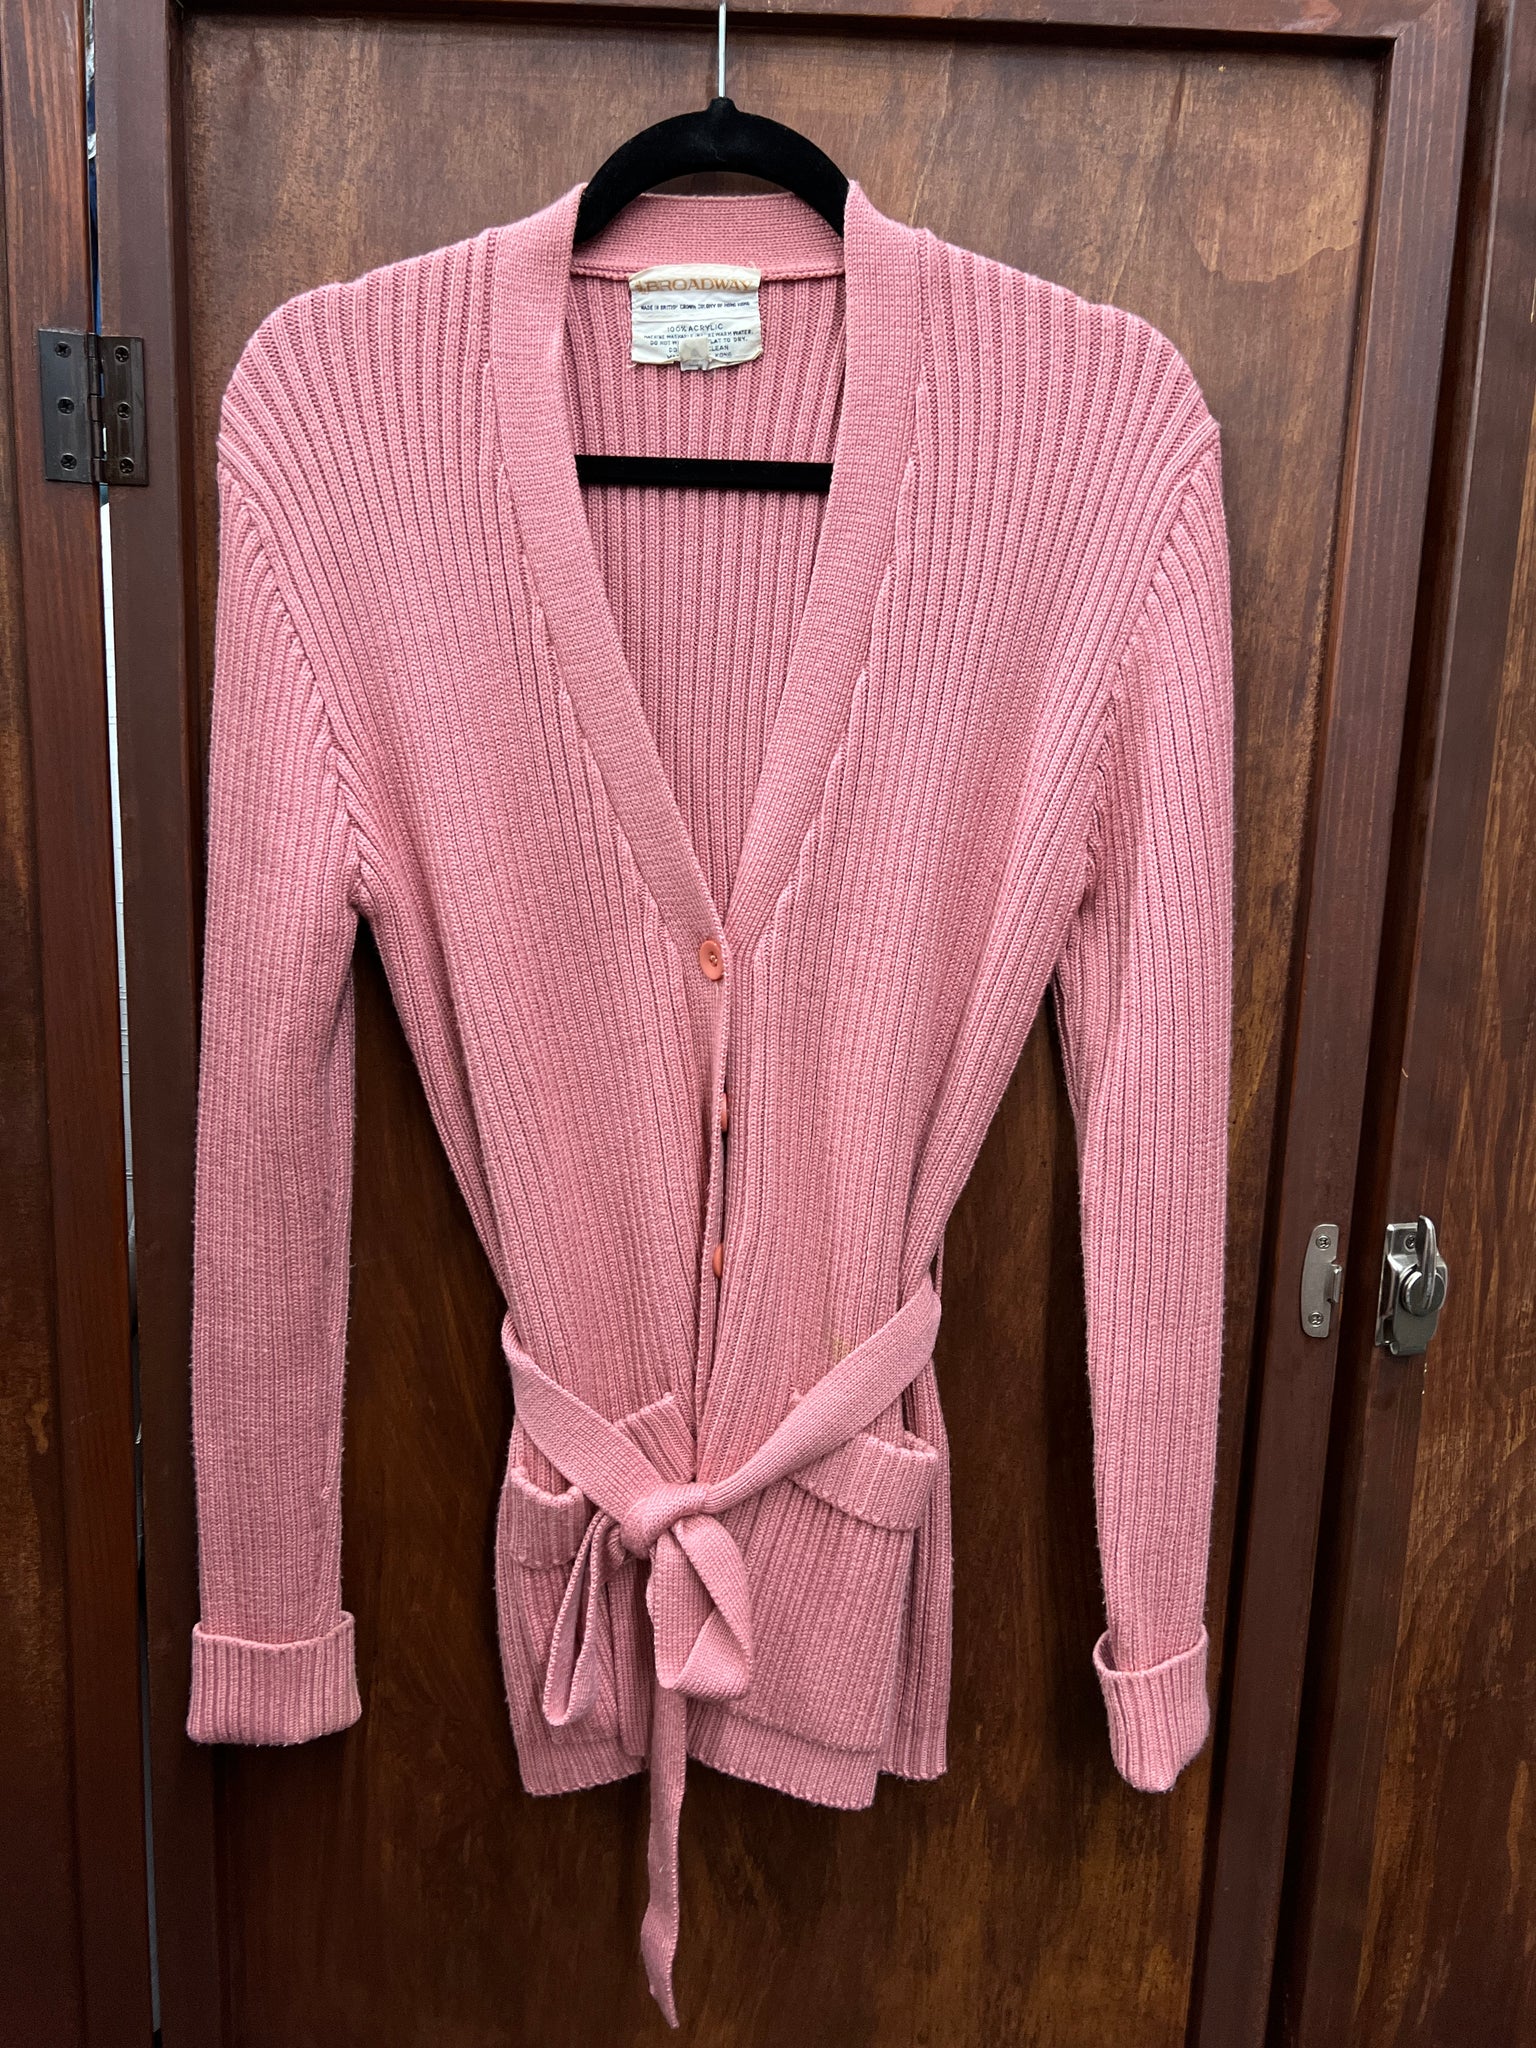 1970s-SWEATER- Broadway light pink belted cardigan